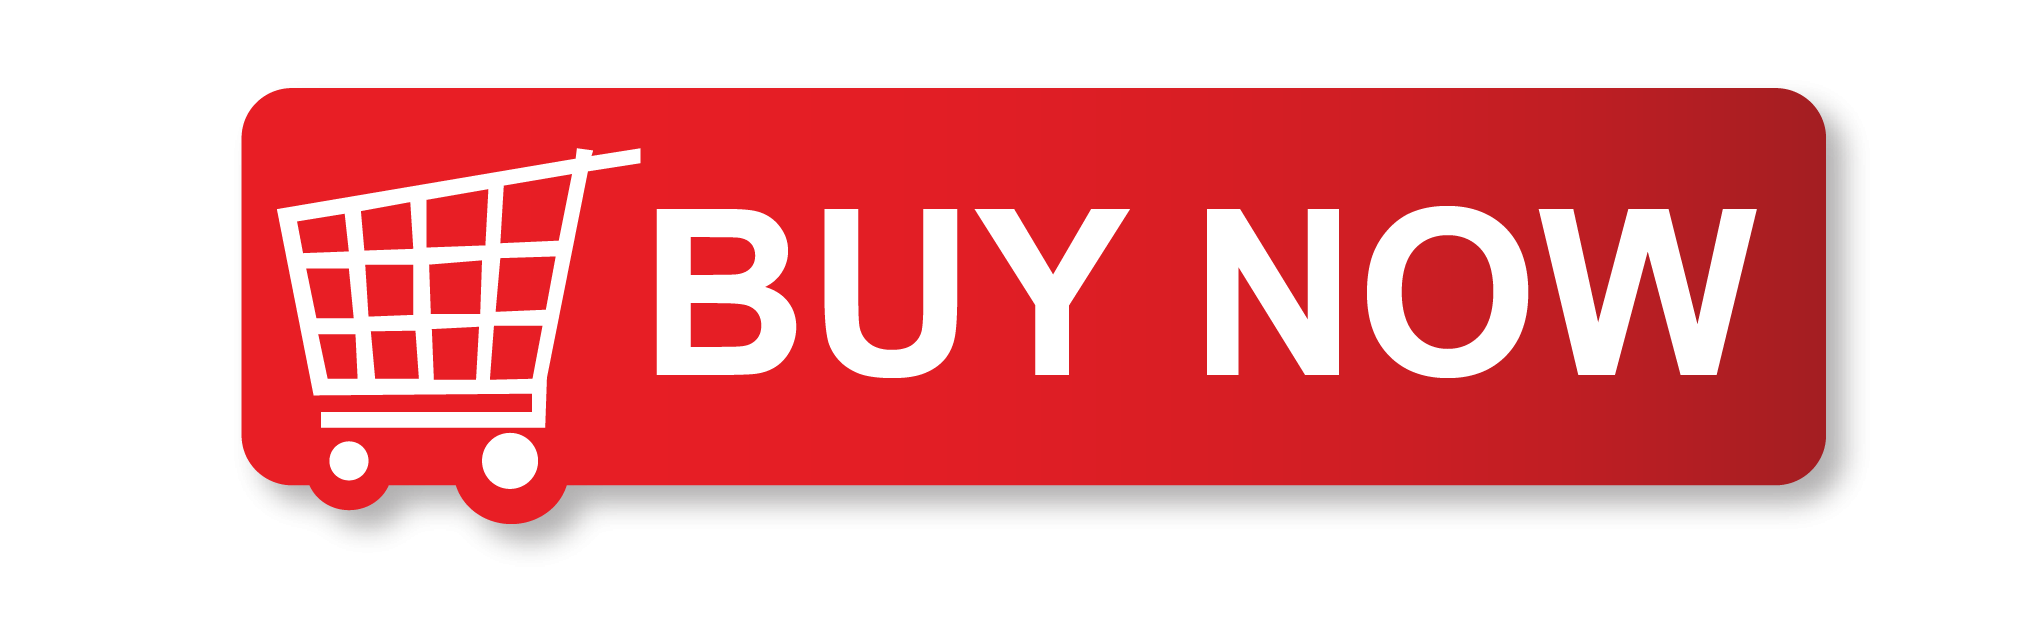 Buy Now PNG HD Images